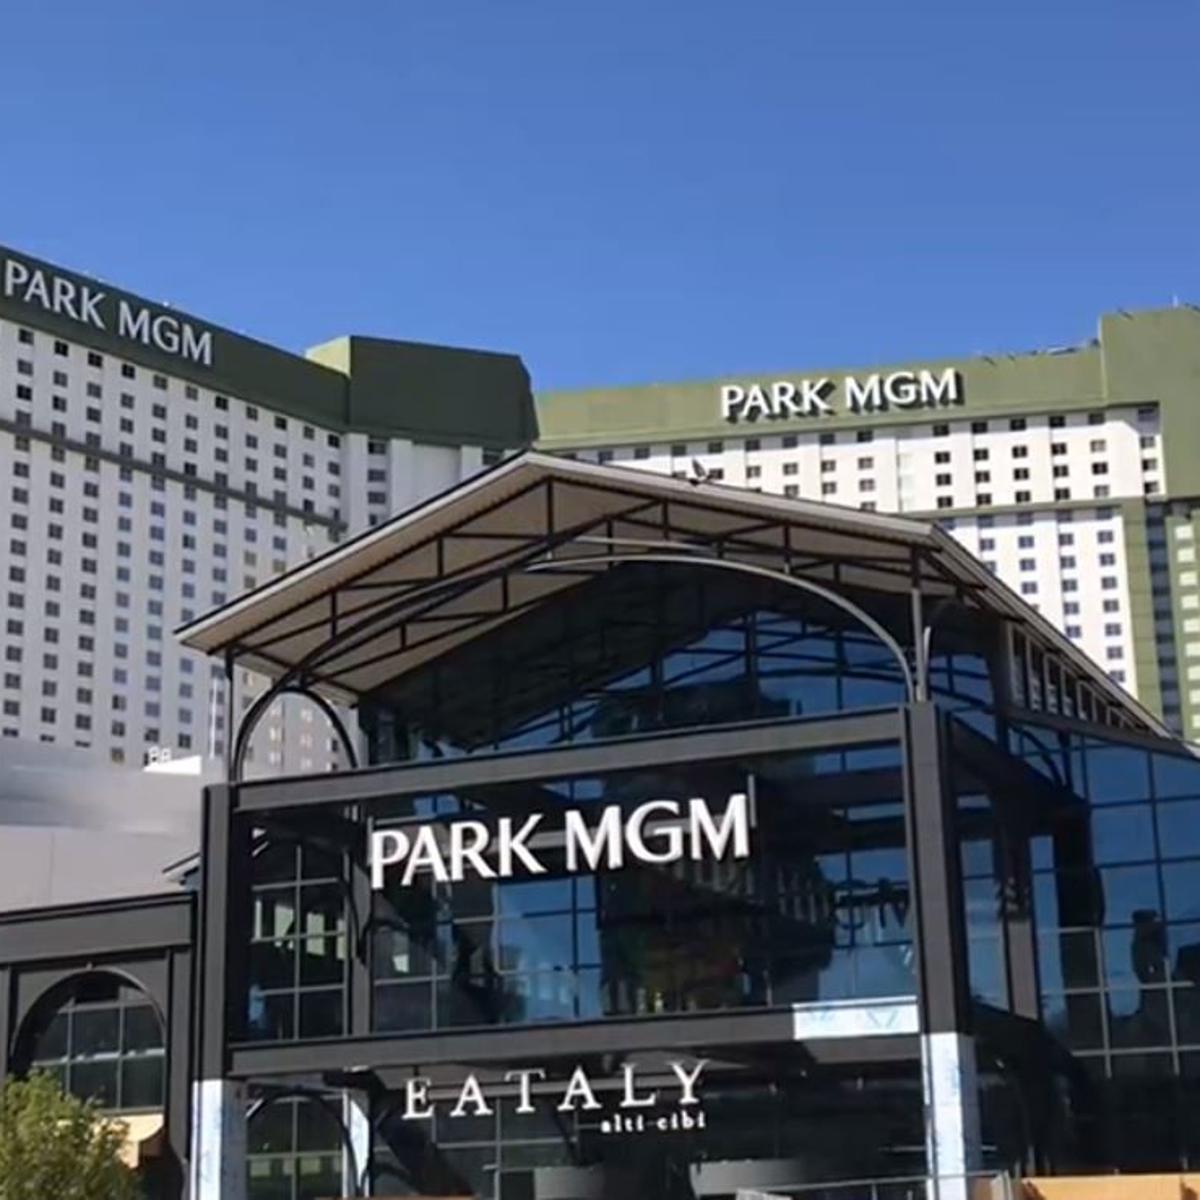 is there a casino in park mgm